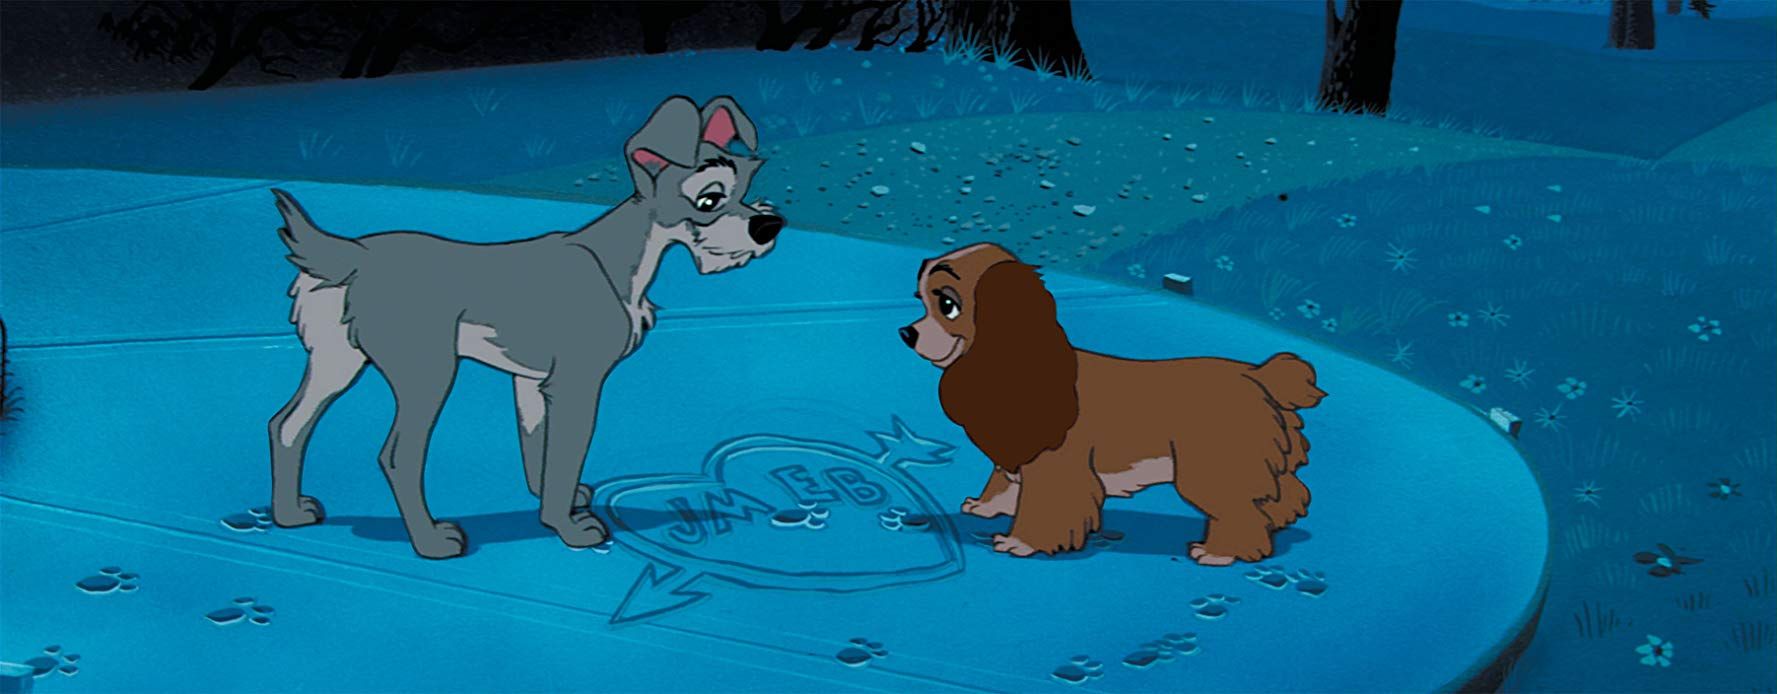 Lady and the Tramp Live-Action Remake Cast